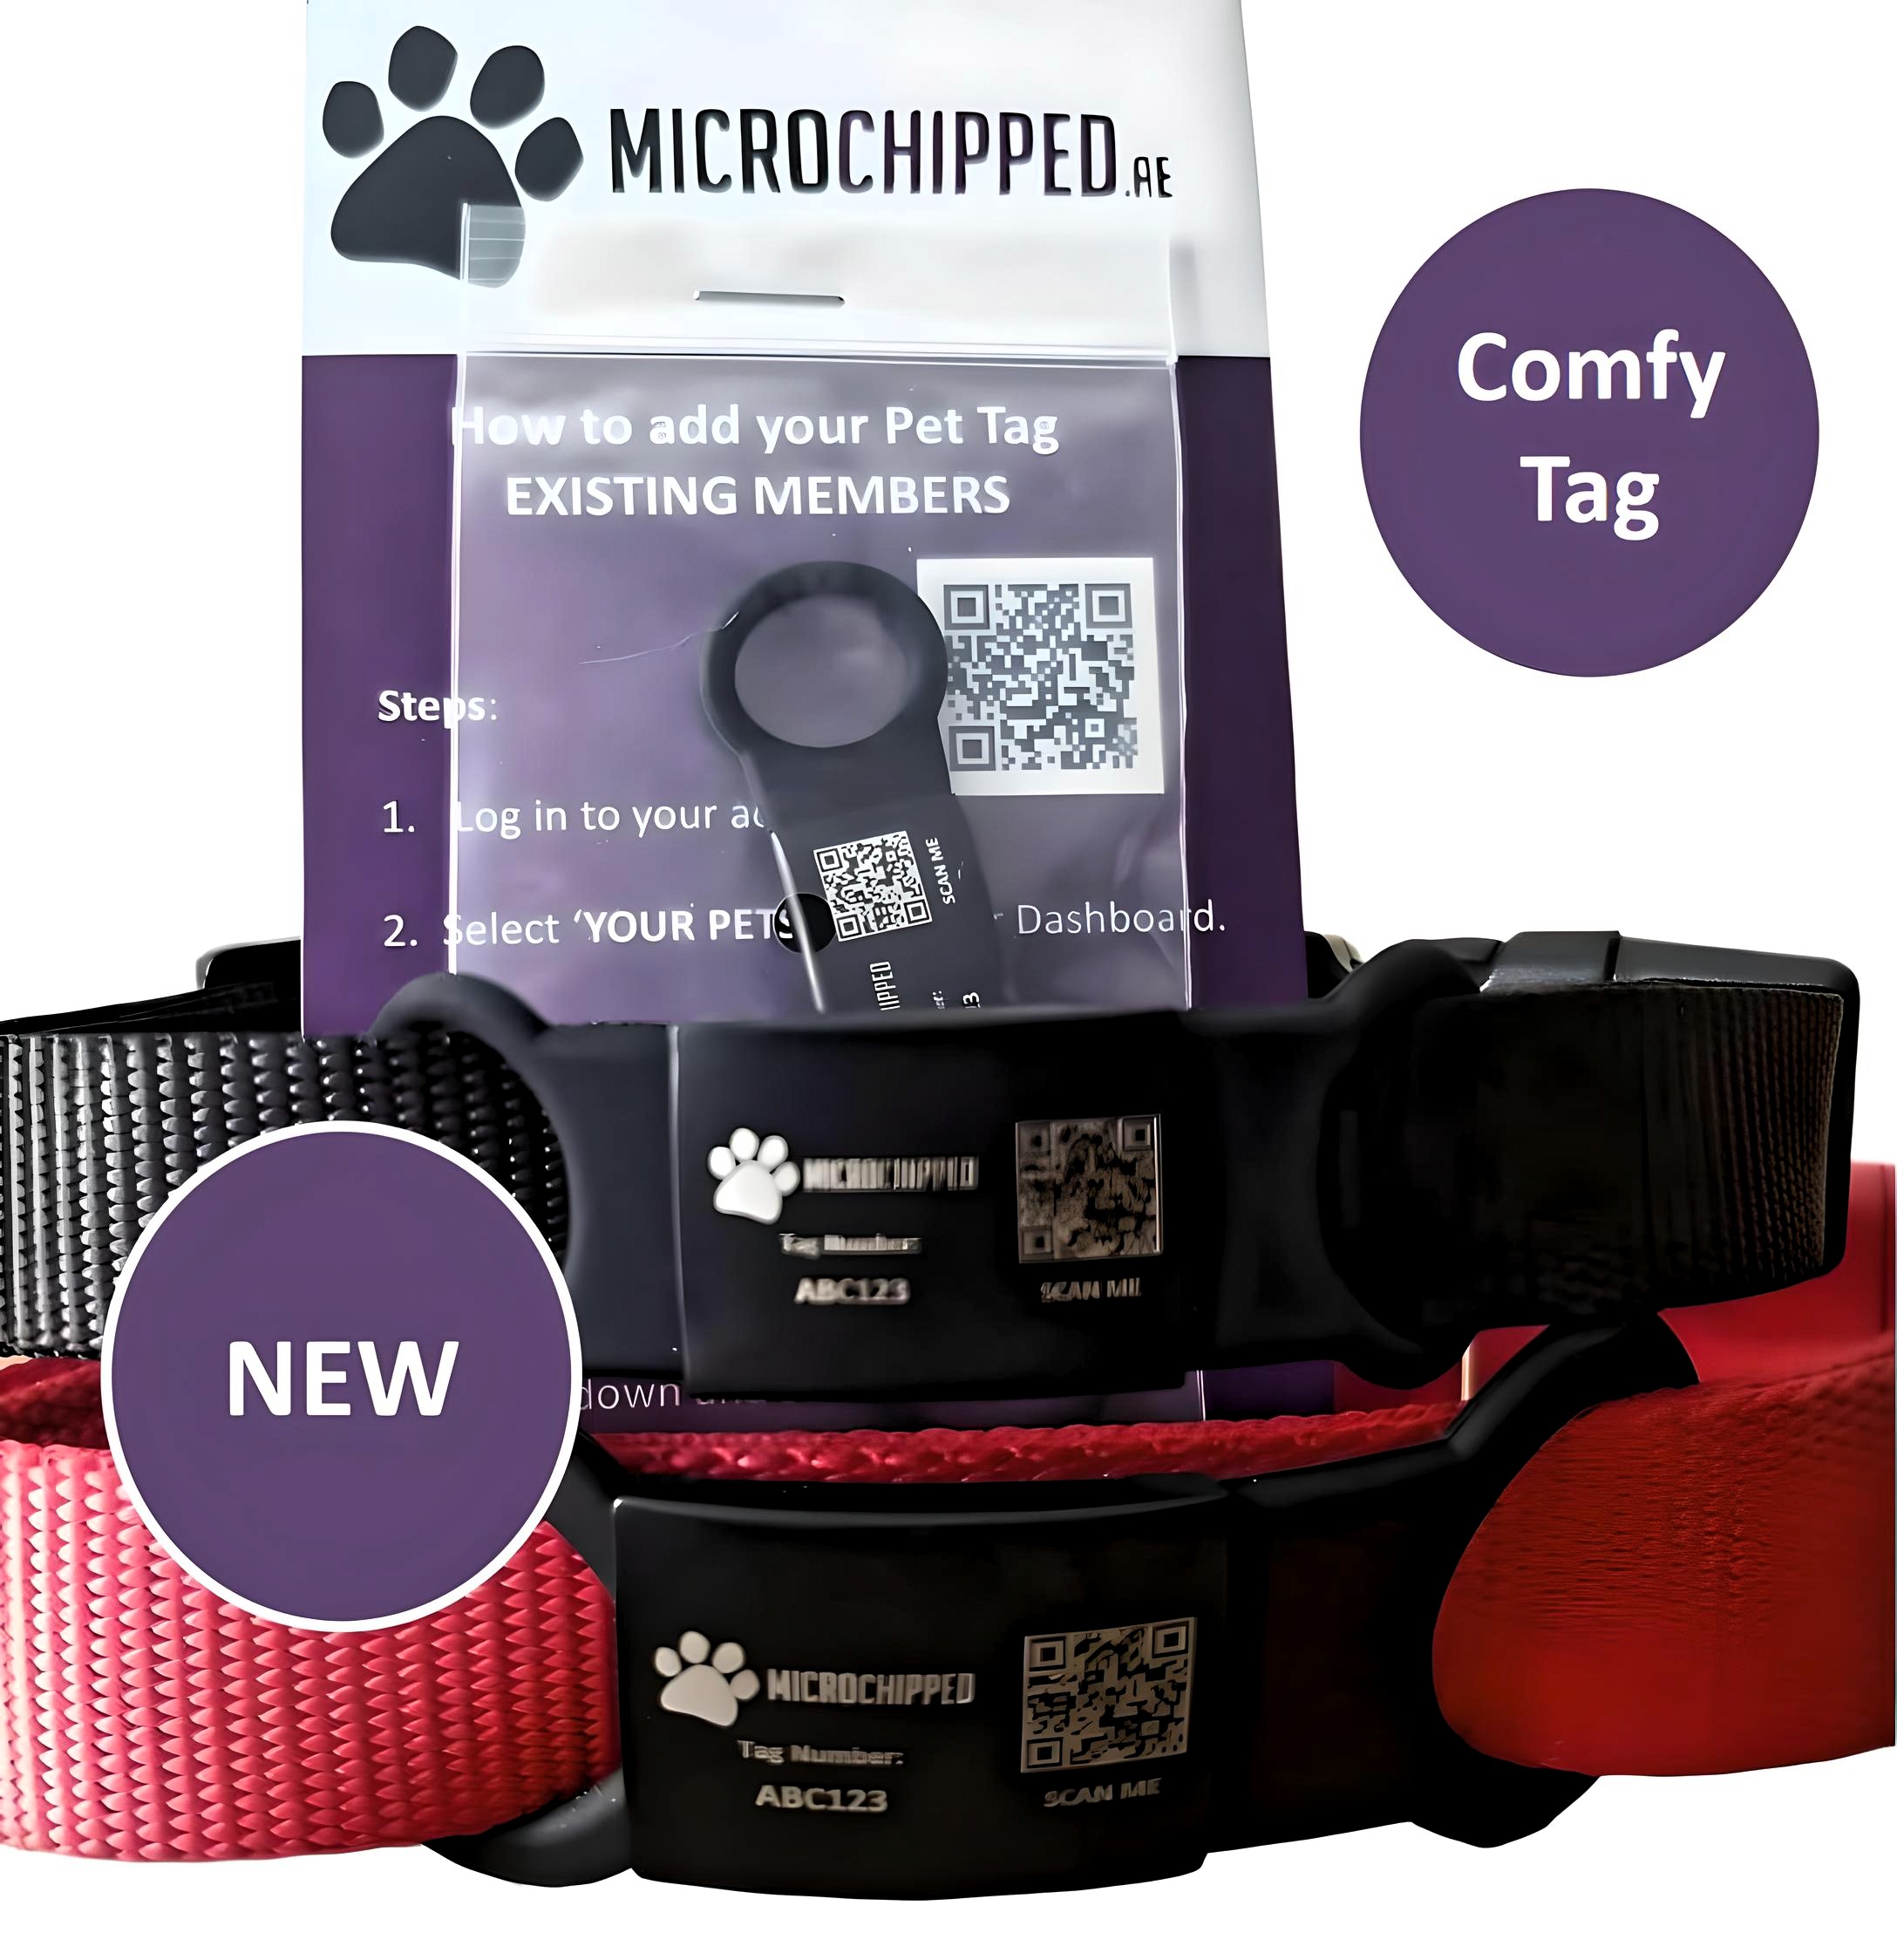 buy a microchipped pet tag